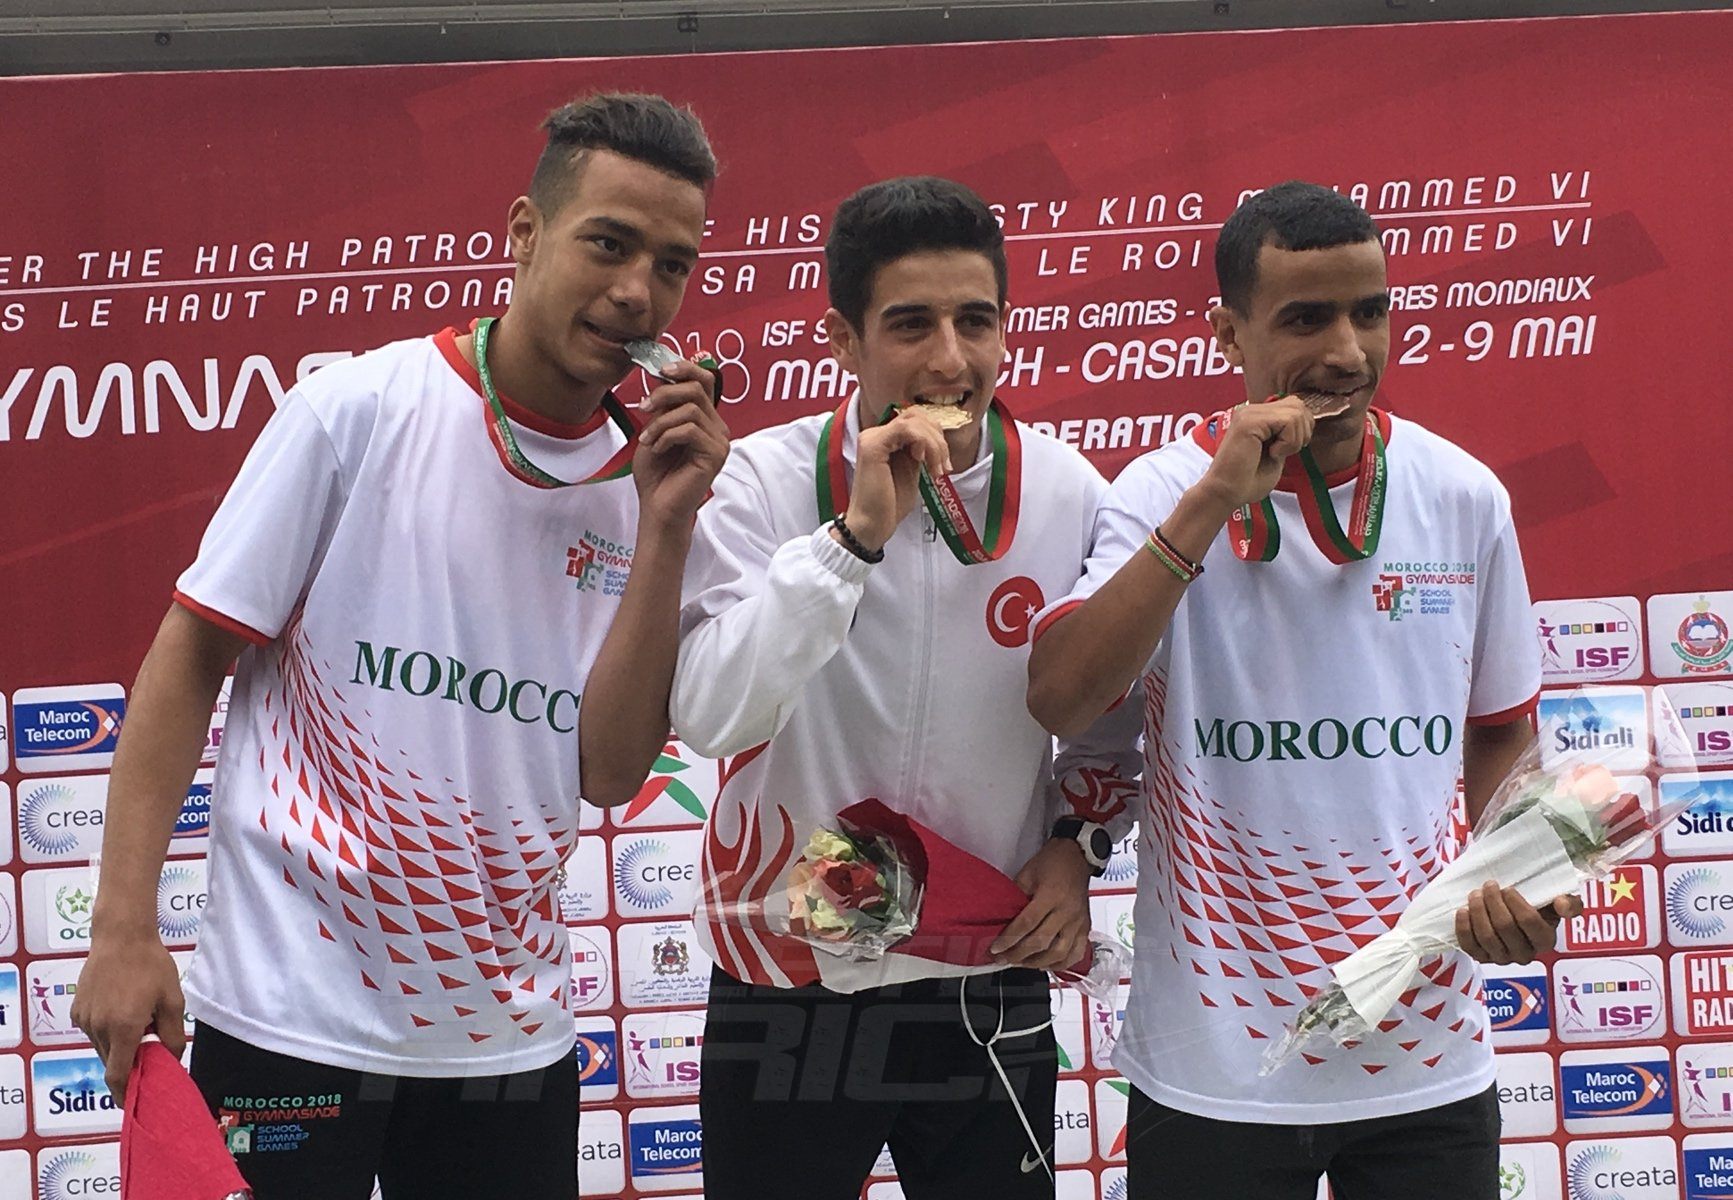 Turkey's Mehmet Celik (C) flanked by Moroccans Mohammed Aboutahiry and Yeva Podhorodetska on the podium after the Boys 800m medal presentation at Gymnasiade 2018 in Marrakech / Photo Credit: Yomi Omogbeja